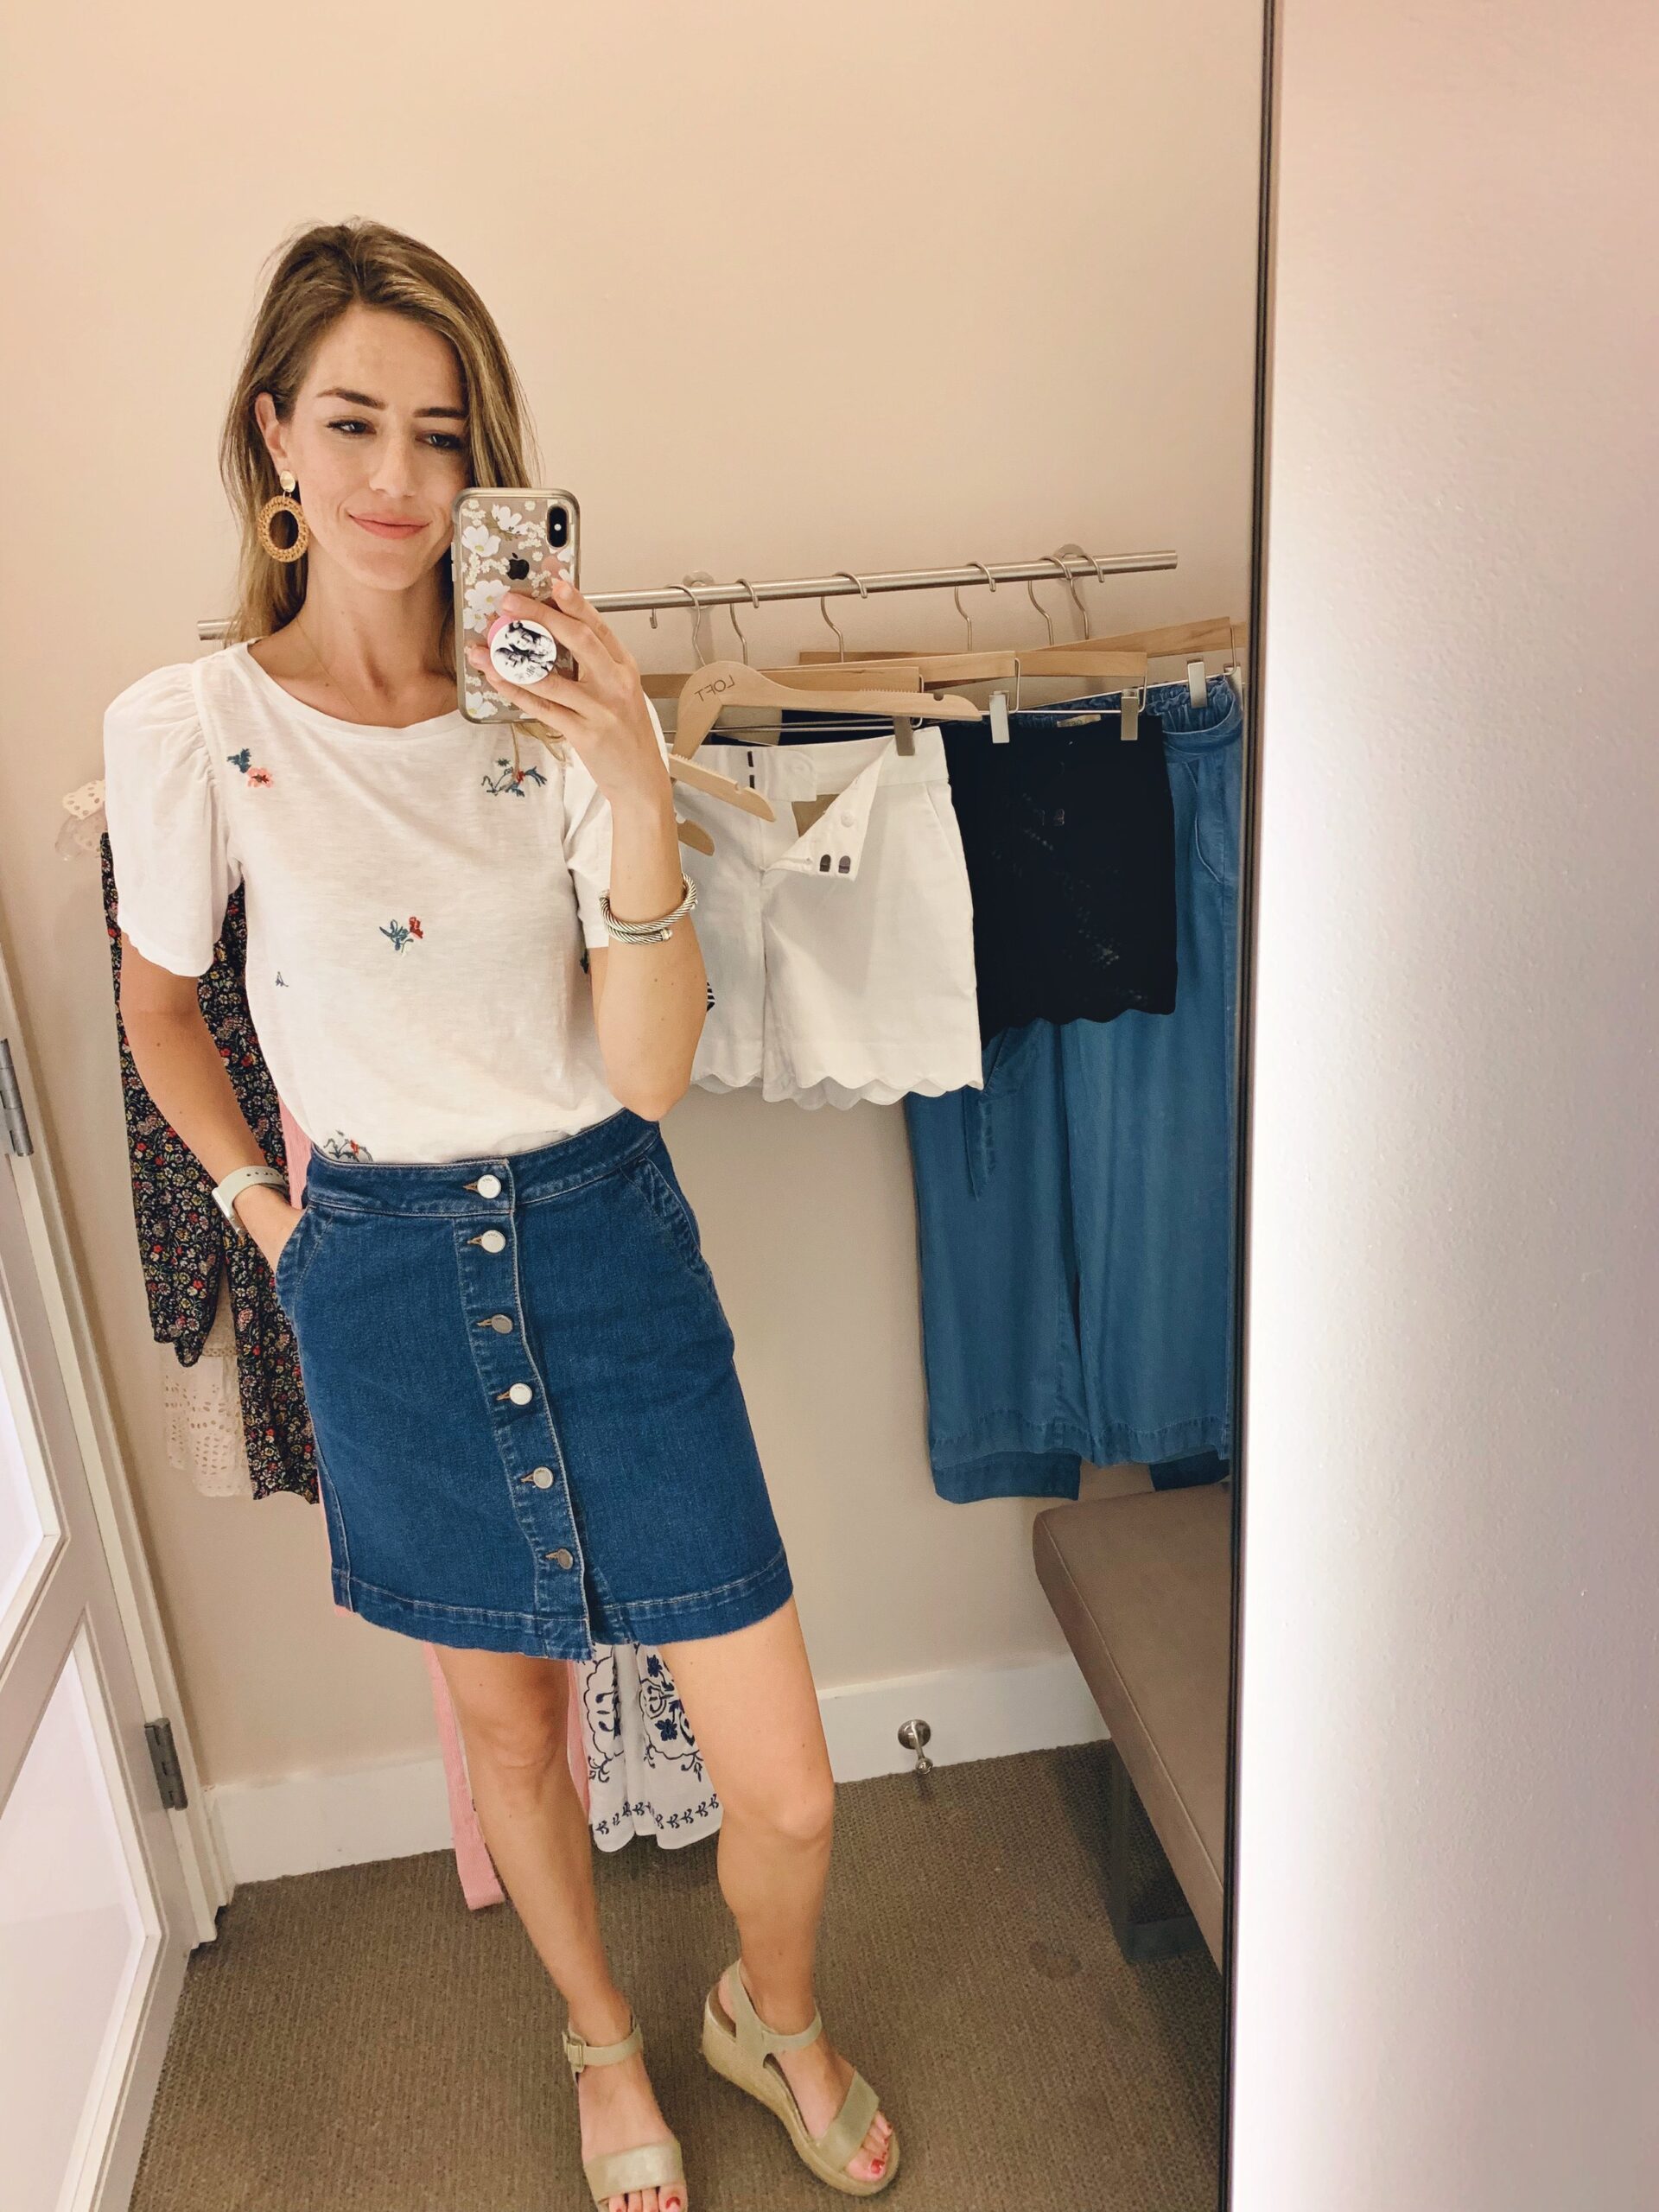 Probably one of my favorite outfits I tried on today, I am loving the revival of the jean skirt. The top with puff sleeves is casual and comfortable, but the embroidery takes a white shirt to the next level. The shirt is $13 and the skirt is $41.